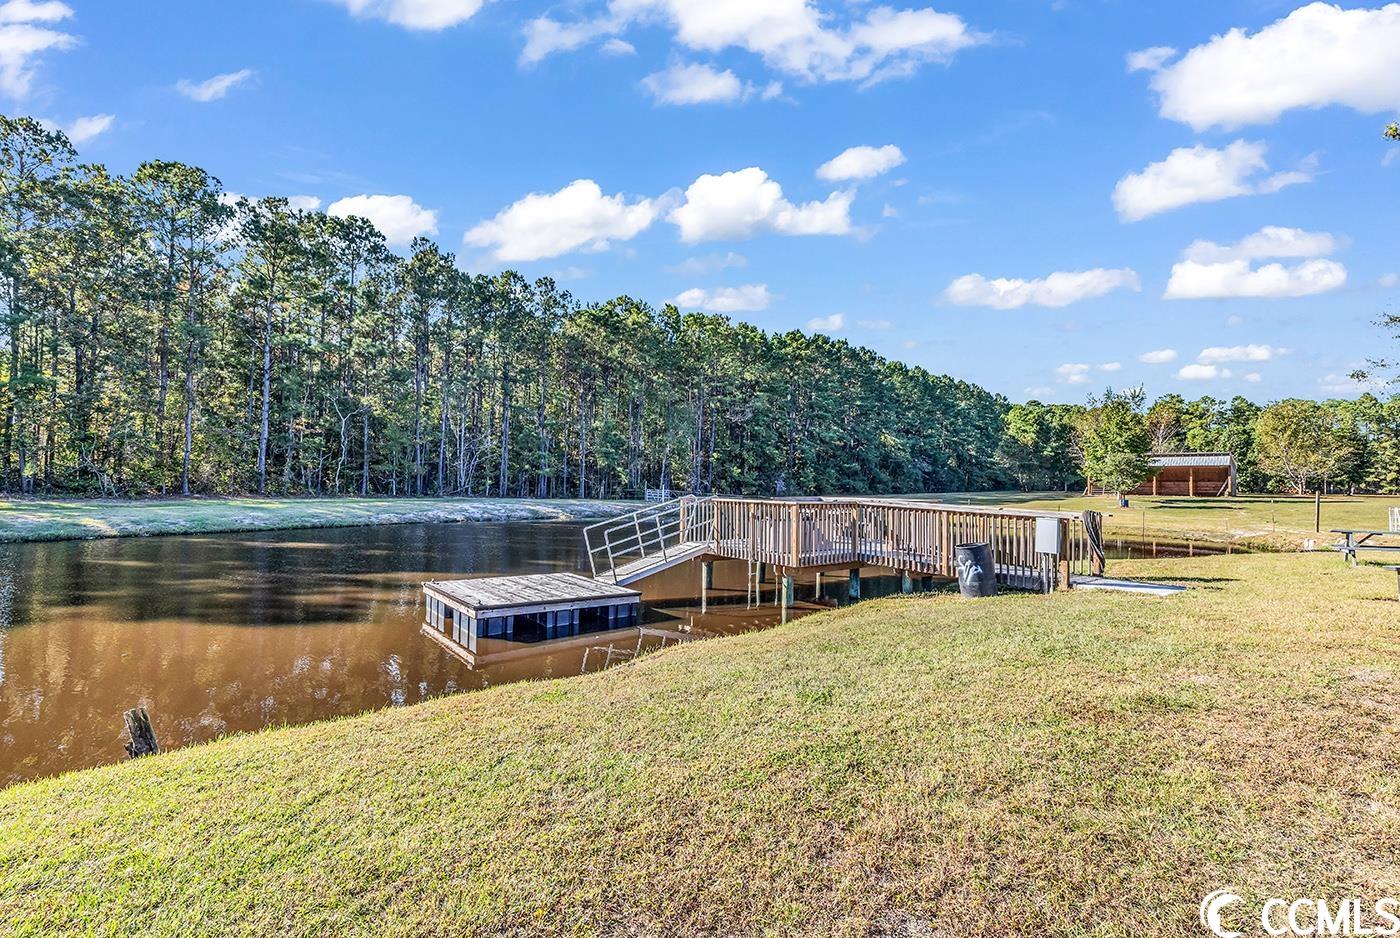 4013 Thomas Rd., Little River, South Carolina, 29566, United States, ,Residential,For Sale,4013 Thomas Rd.,1417185